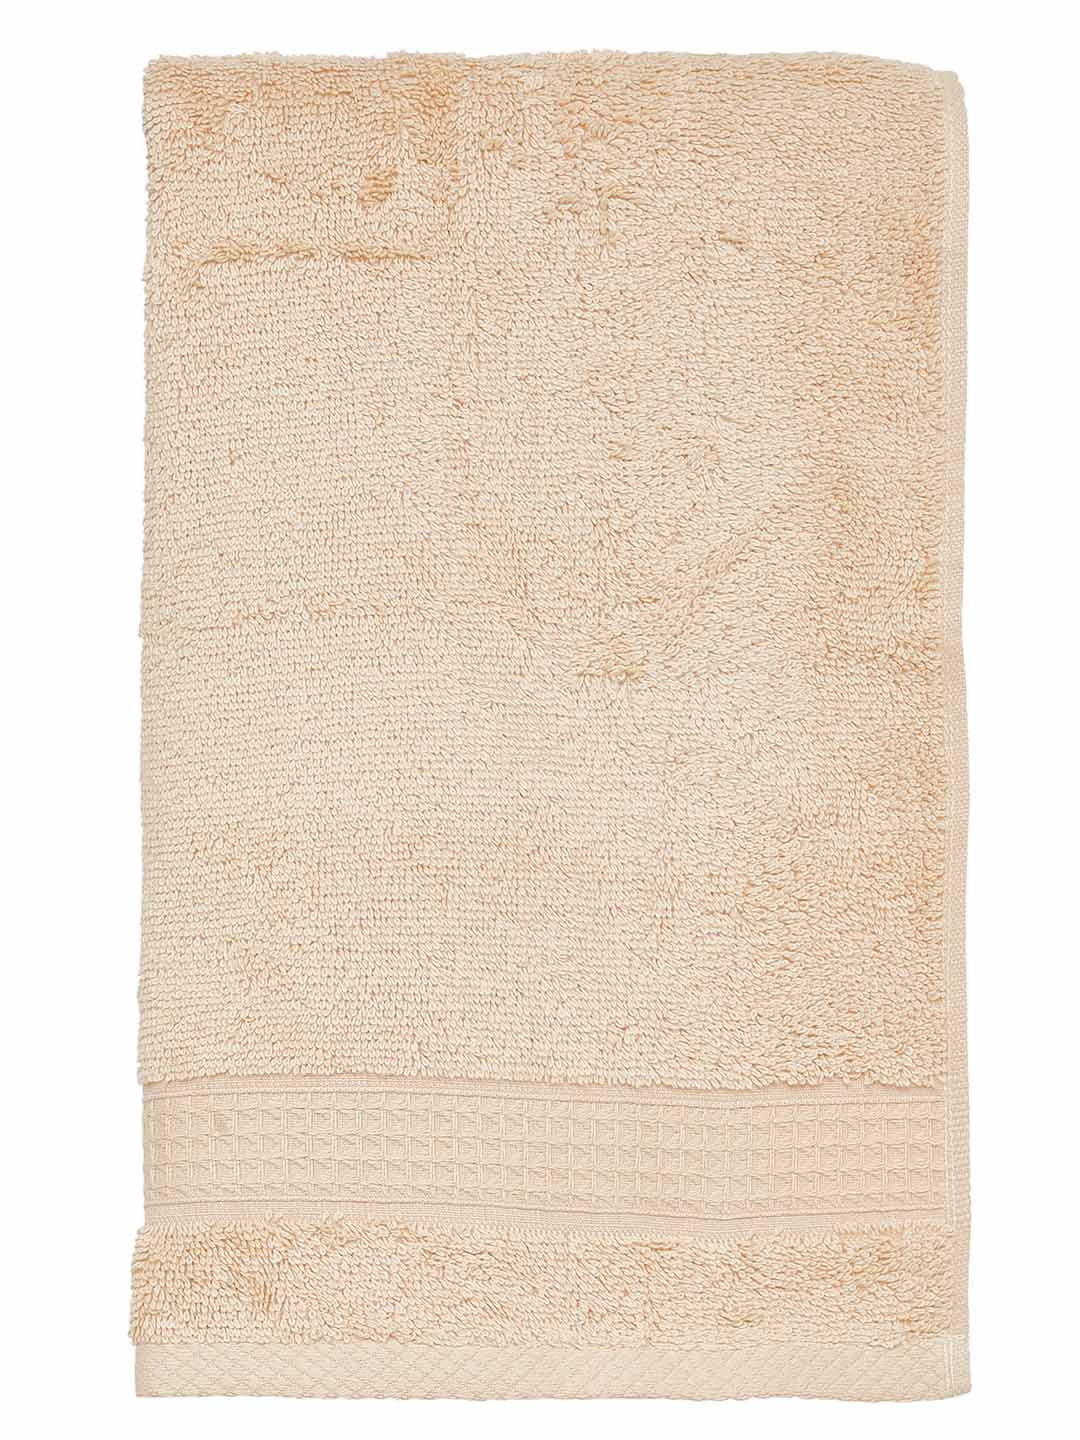 Spaces Organic 2 Pieces Hand Towels (Brown)